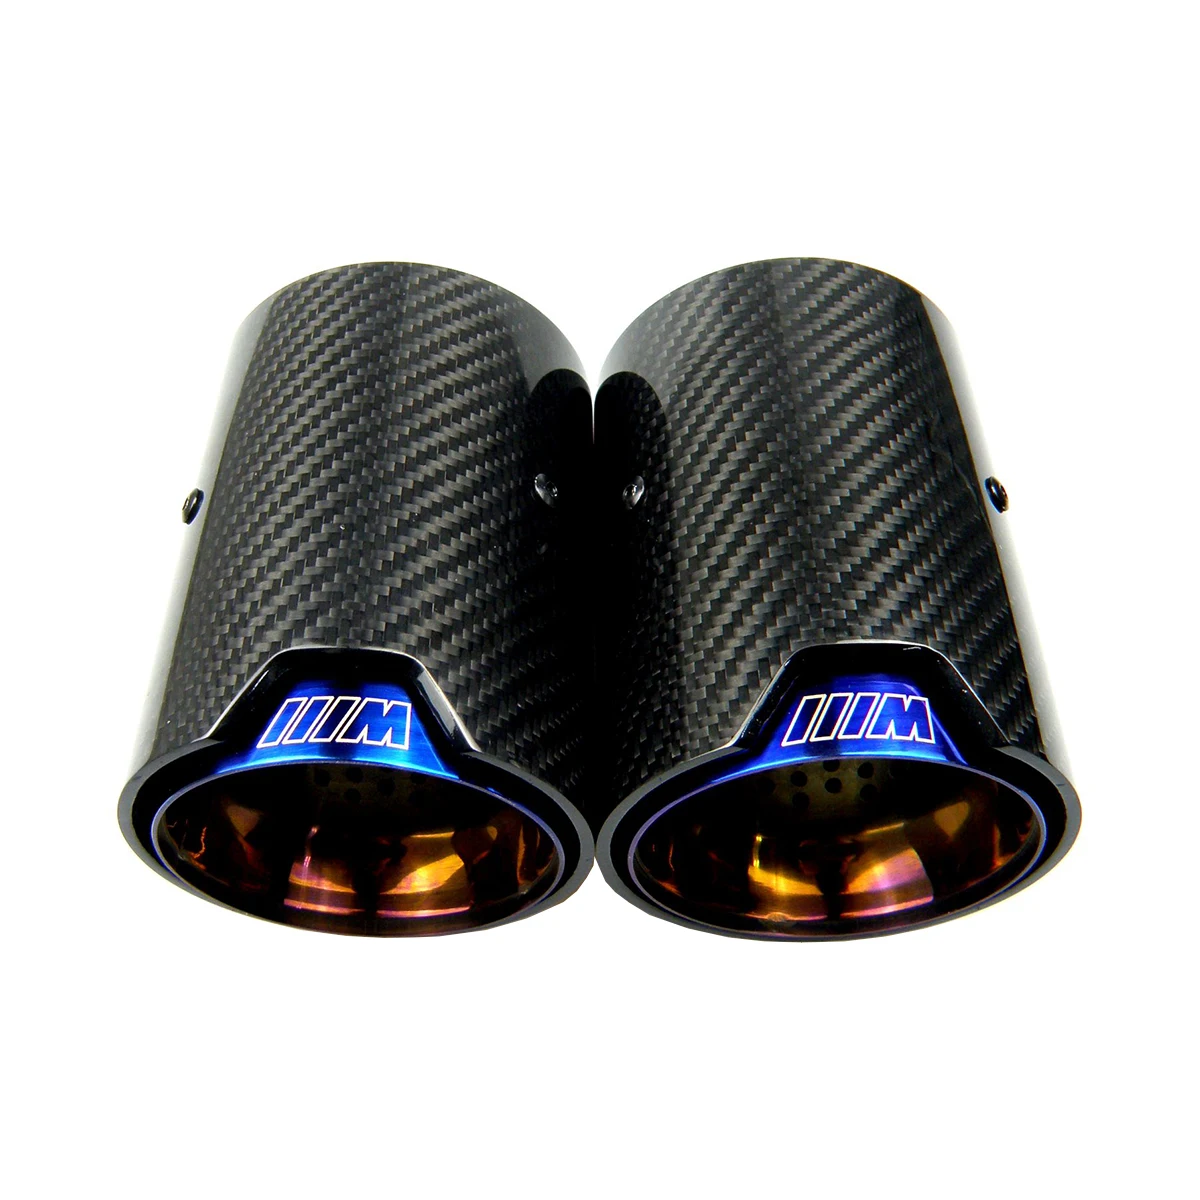 1 Piece Burnt Blue Carbon Fiber Exhaust Tip Muffler For BMW M Performance exhaust pipe M2 F87 M3 F80 M4 F82 F83 M5 F10 M6 F12 enlarge